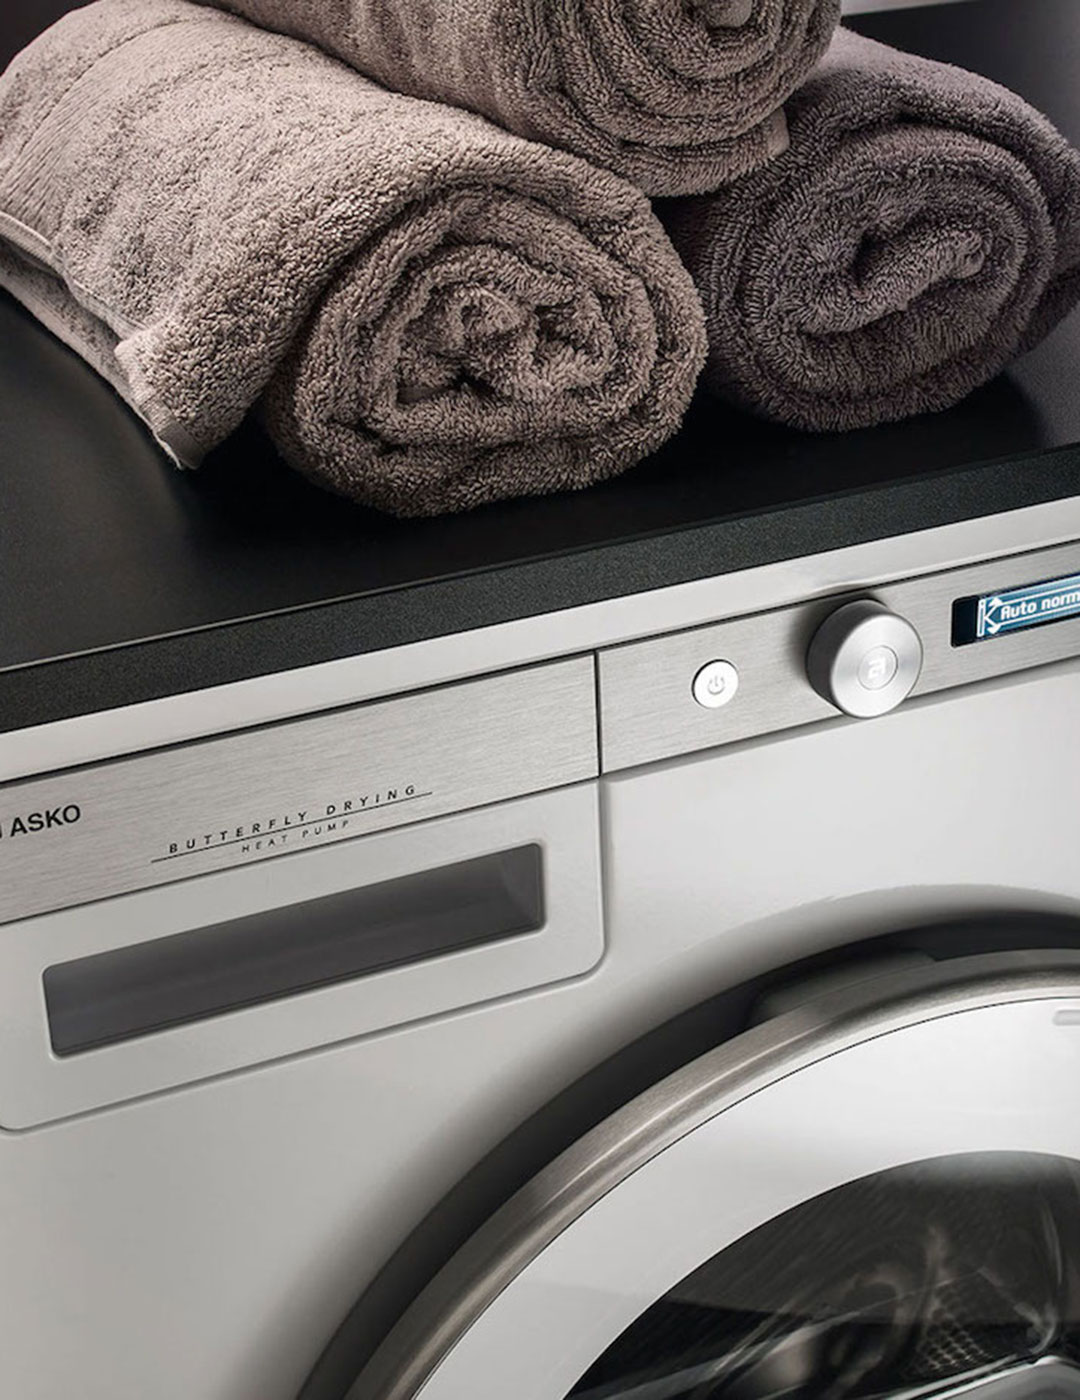 ASKO-Laundry-Tumble-Dryers-Features-Eliminating-your-biggest-troubles-resized-mobile.jpg